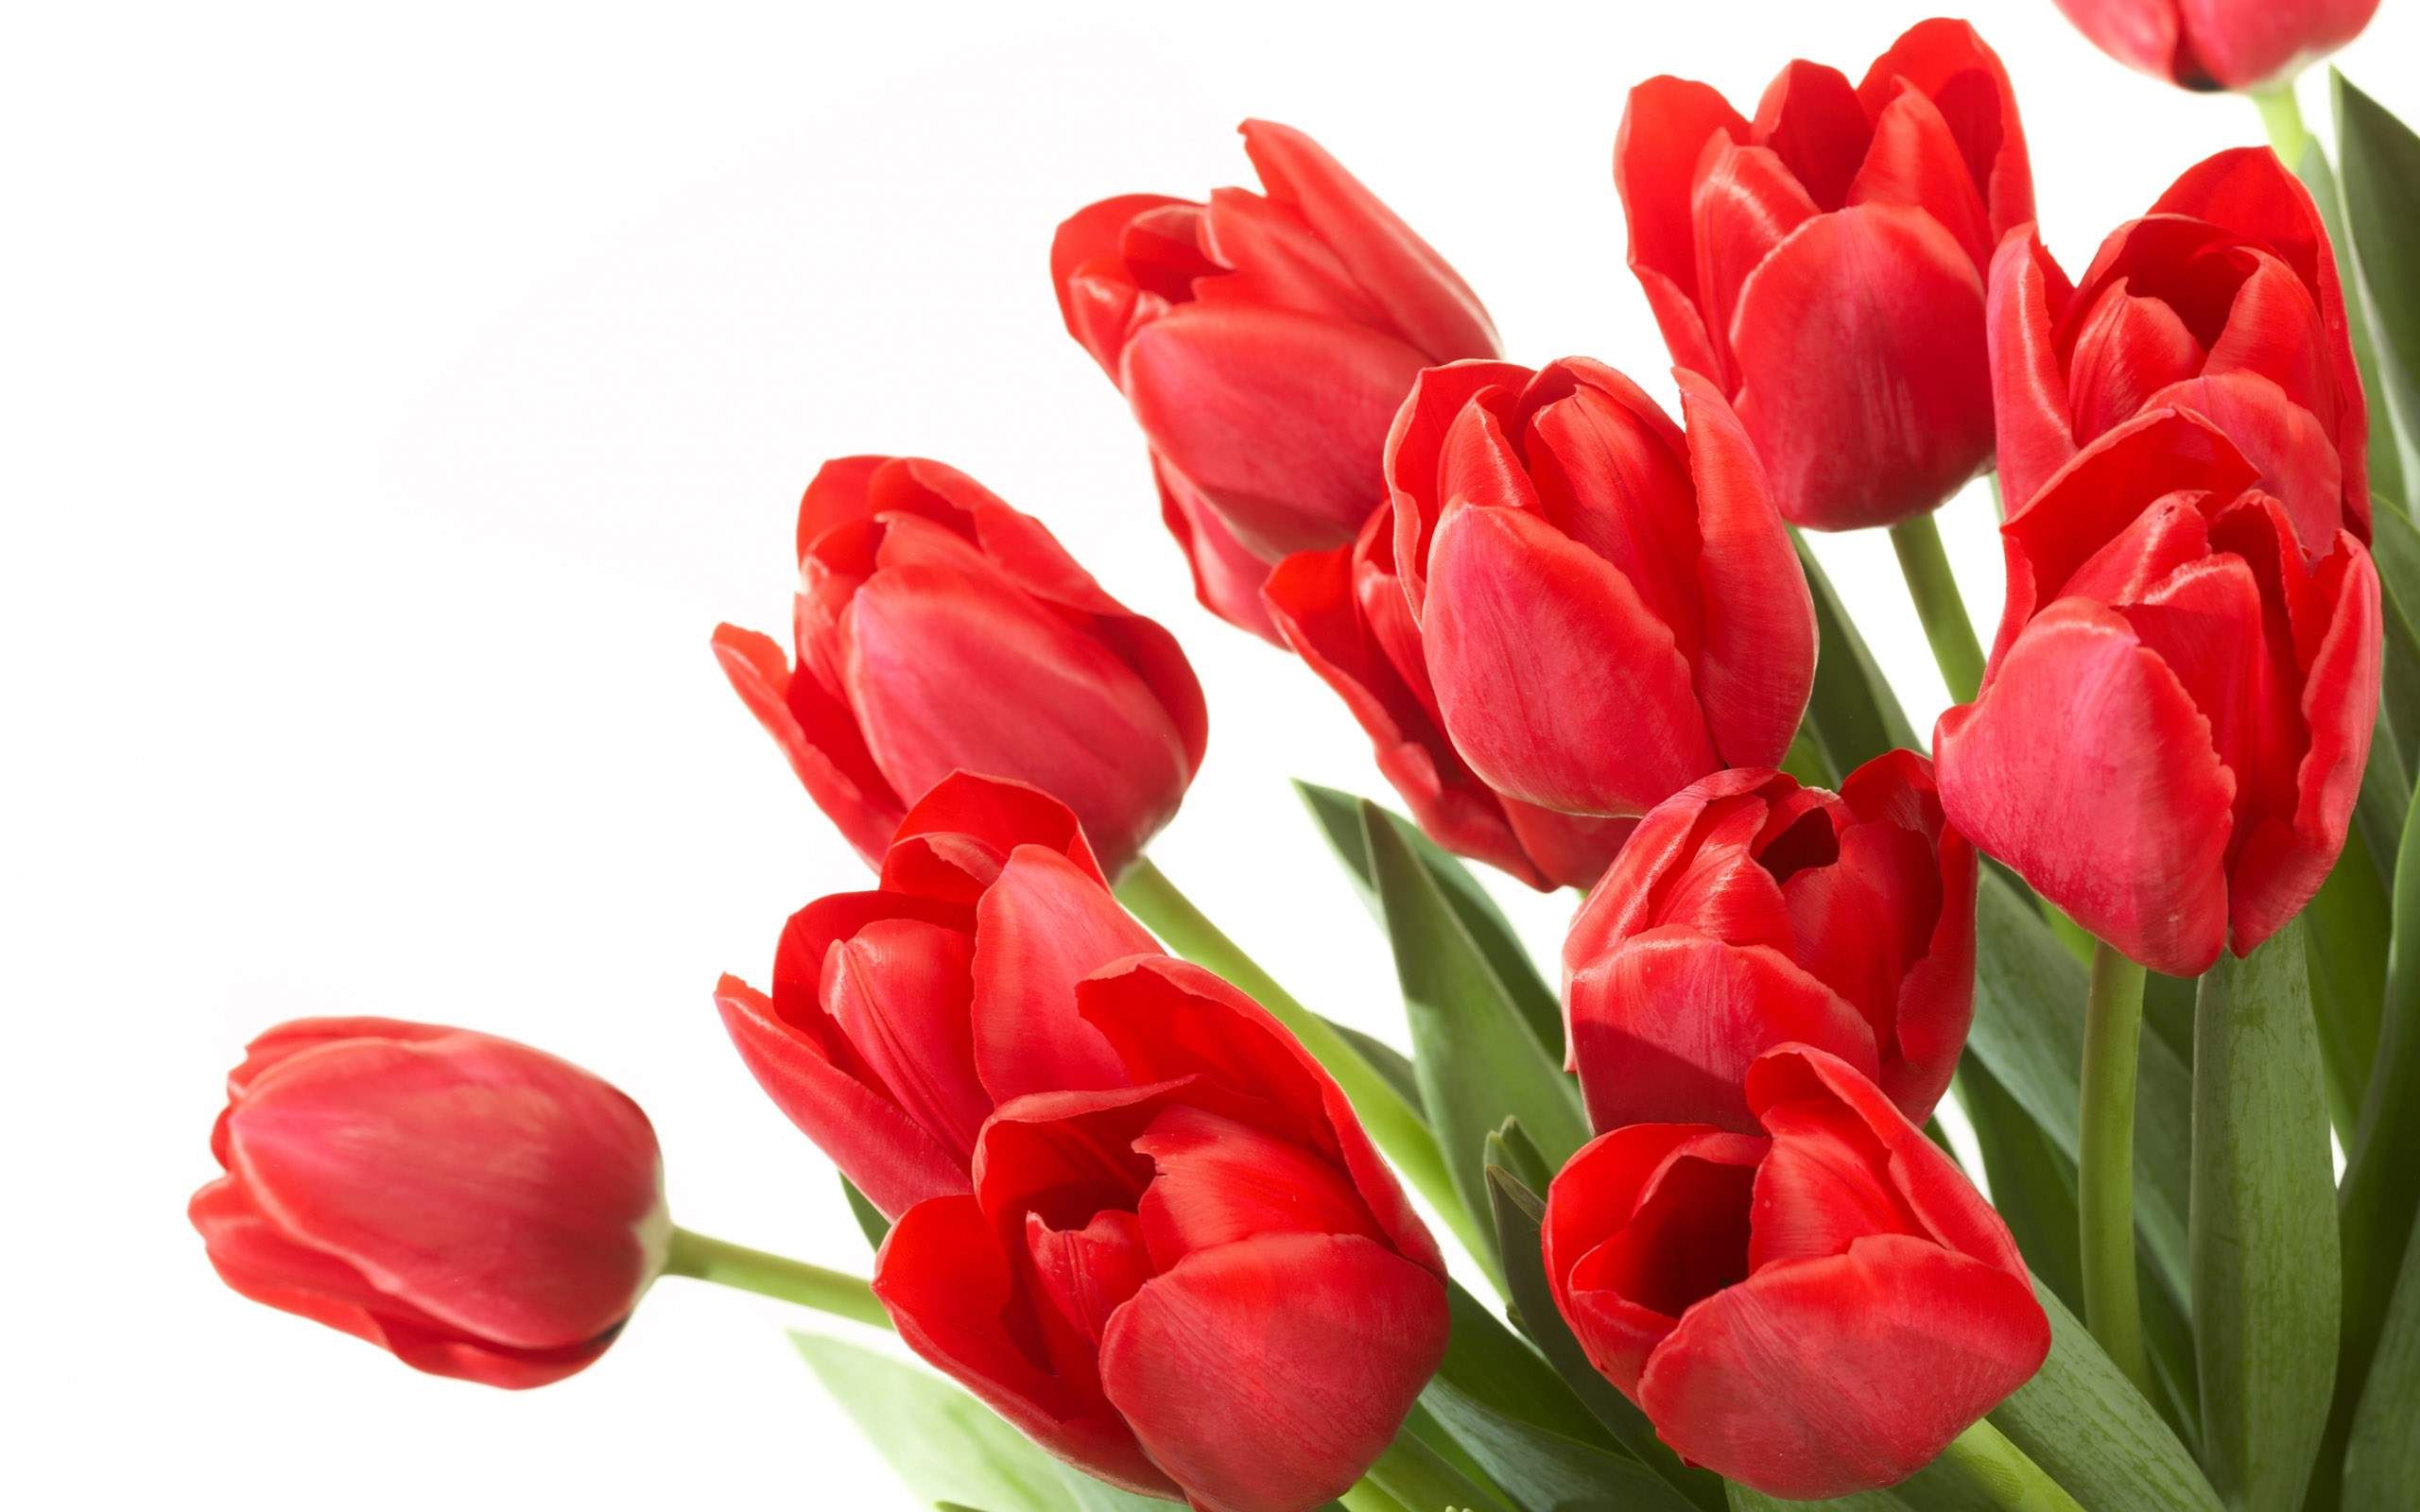 40 BEAUTIFUL FLOWER WALLPAPERS FREE TO DOWNLOAD | Flowers, Tulips ...